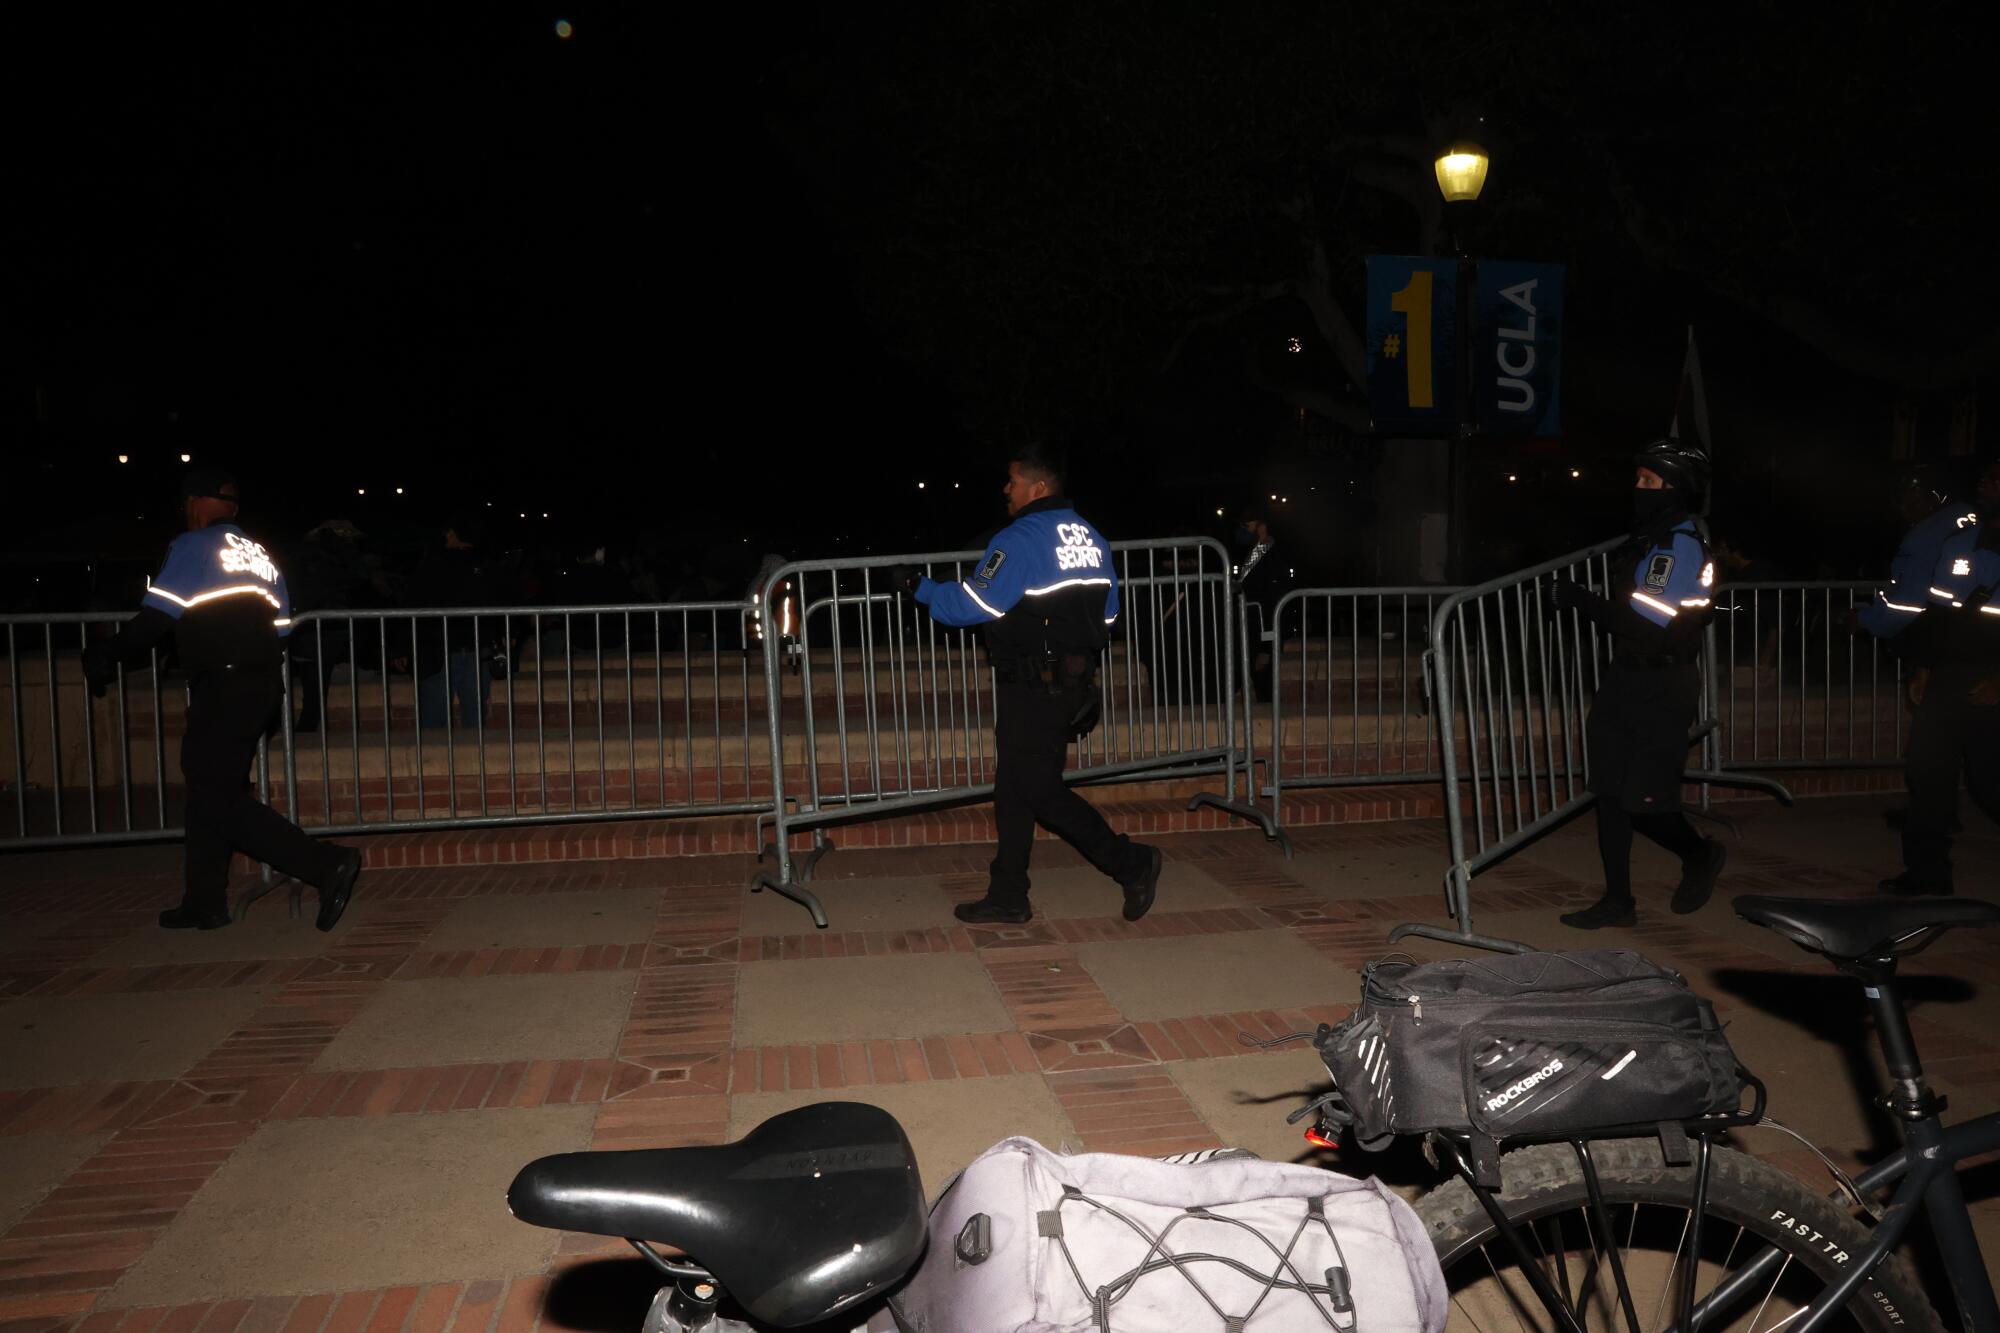 Barricades were installed to surround pro-Palestine demonstrators that have set-up an encampment at UCLA.